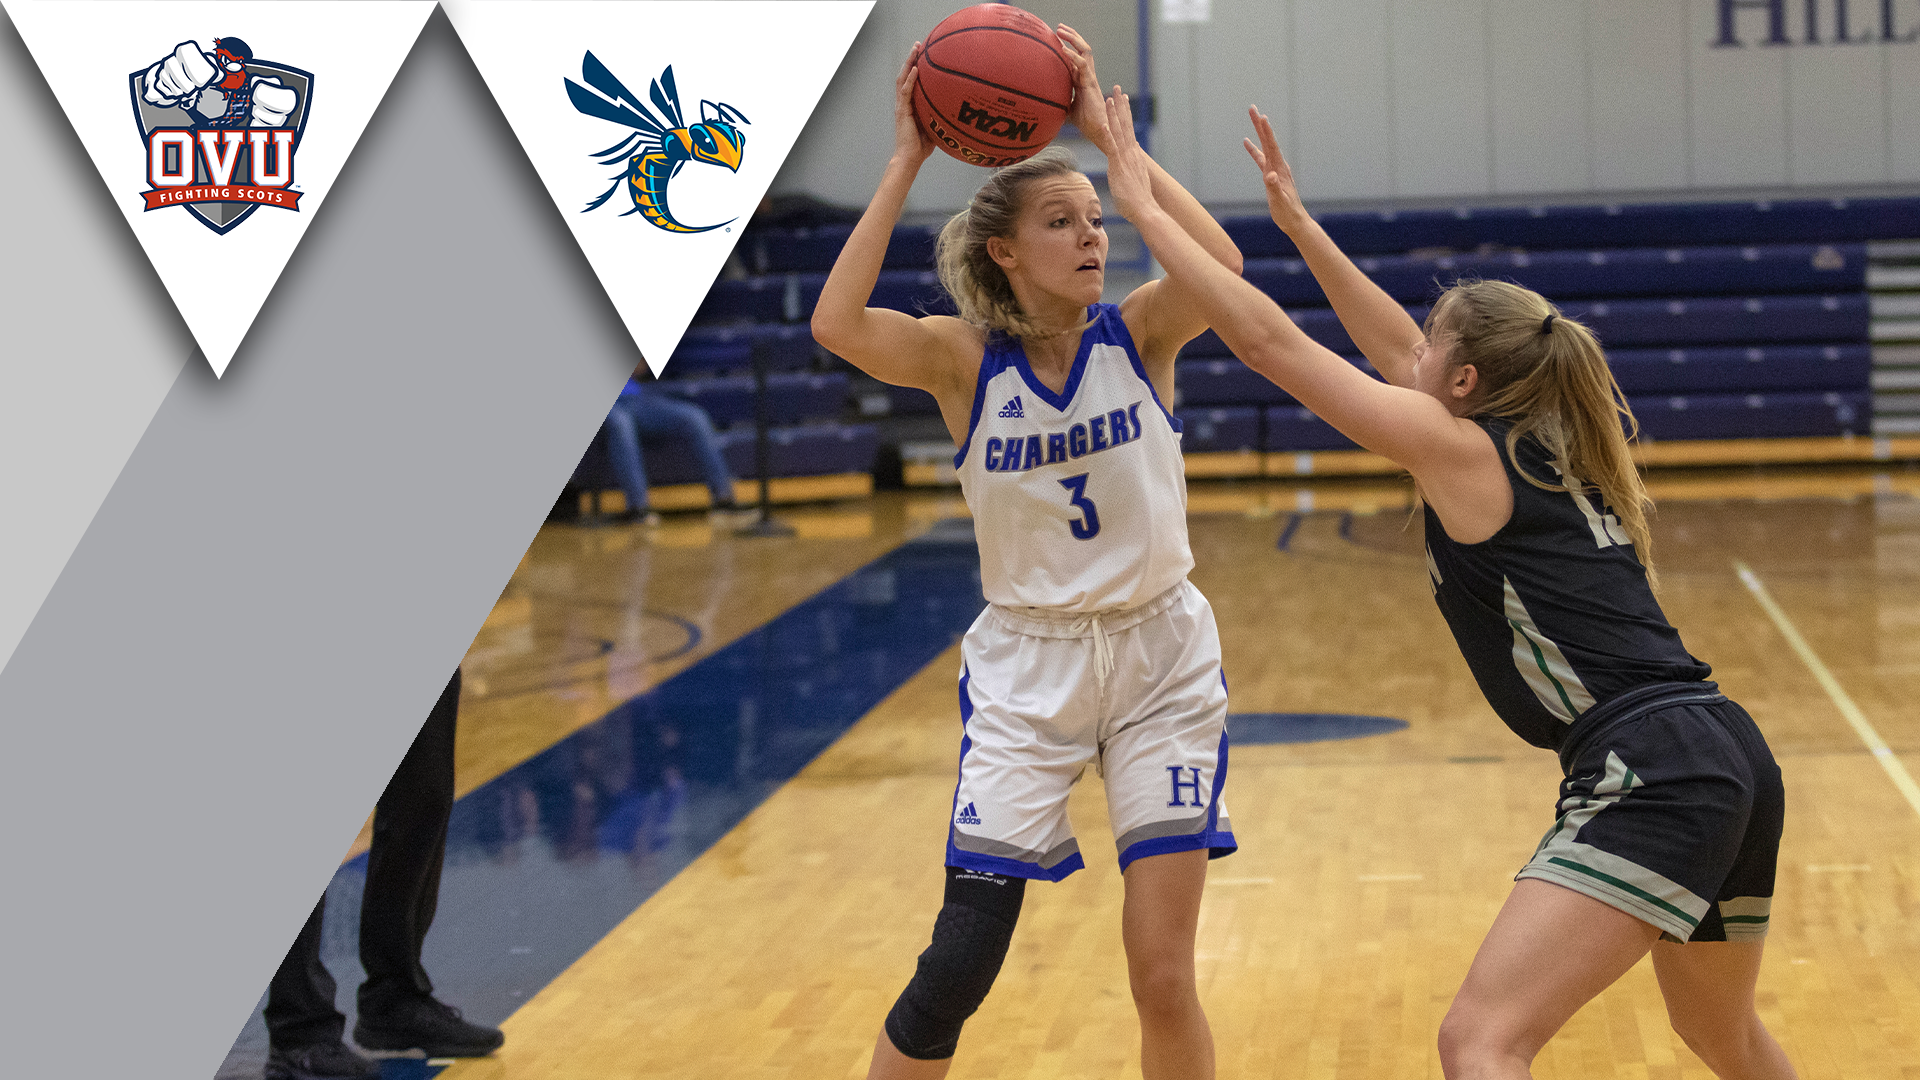 Weekend Preview: Charger women aim to close out season on a winning note